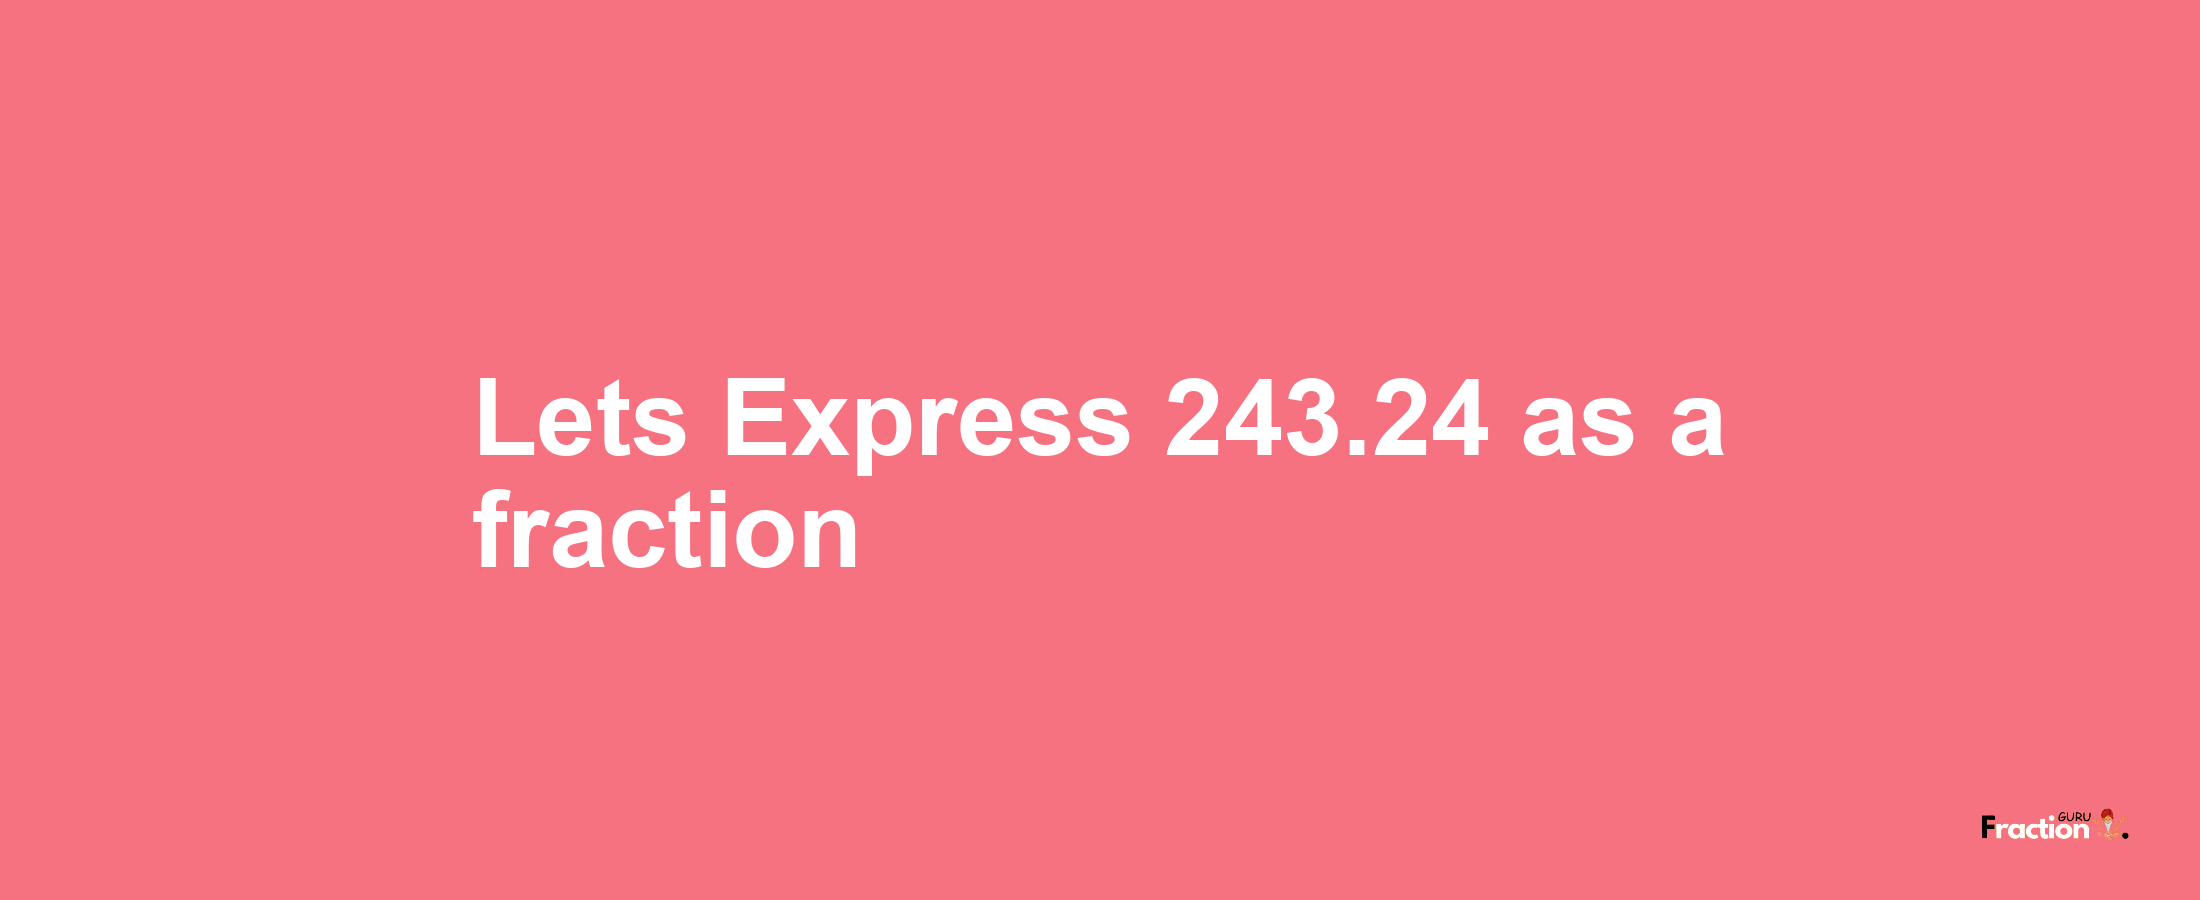 Lets Express 243.24 as afraction